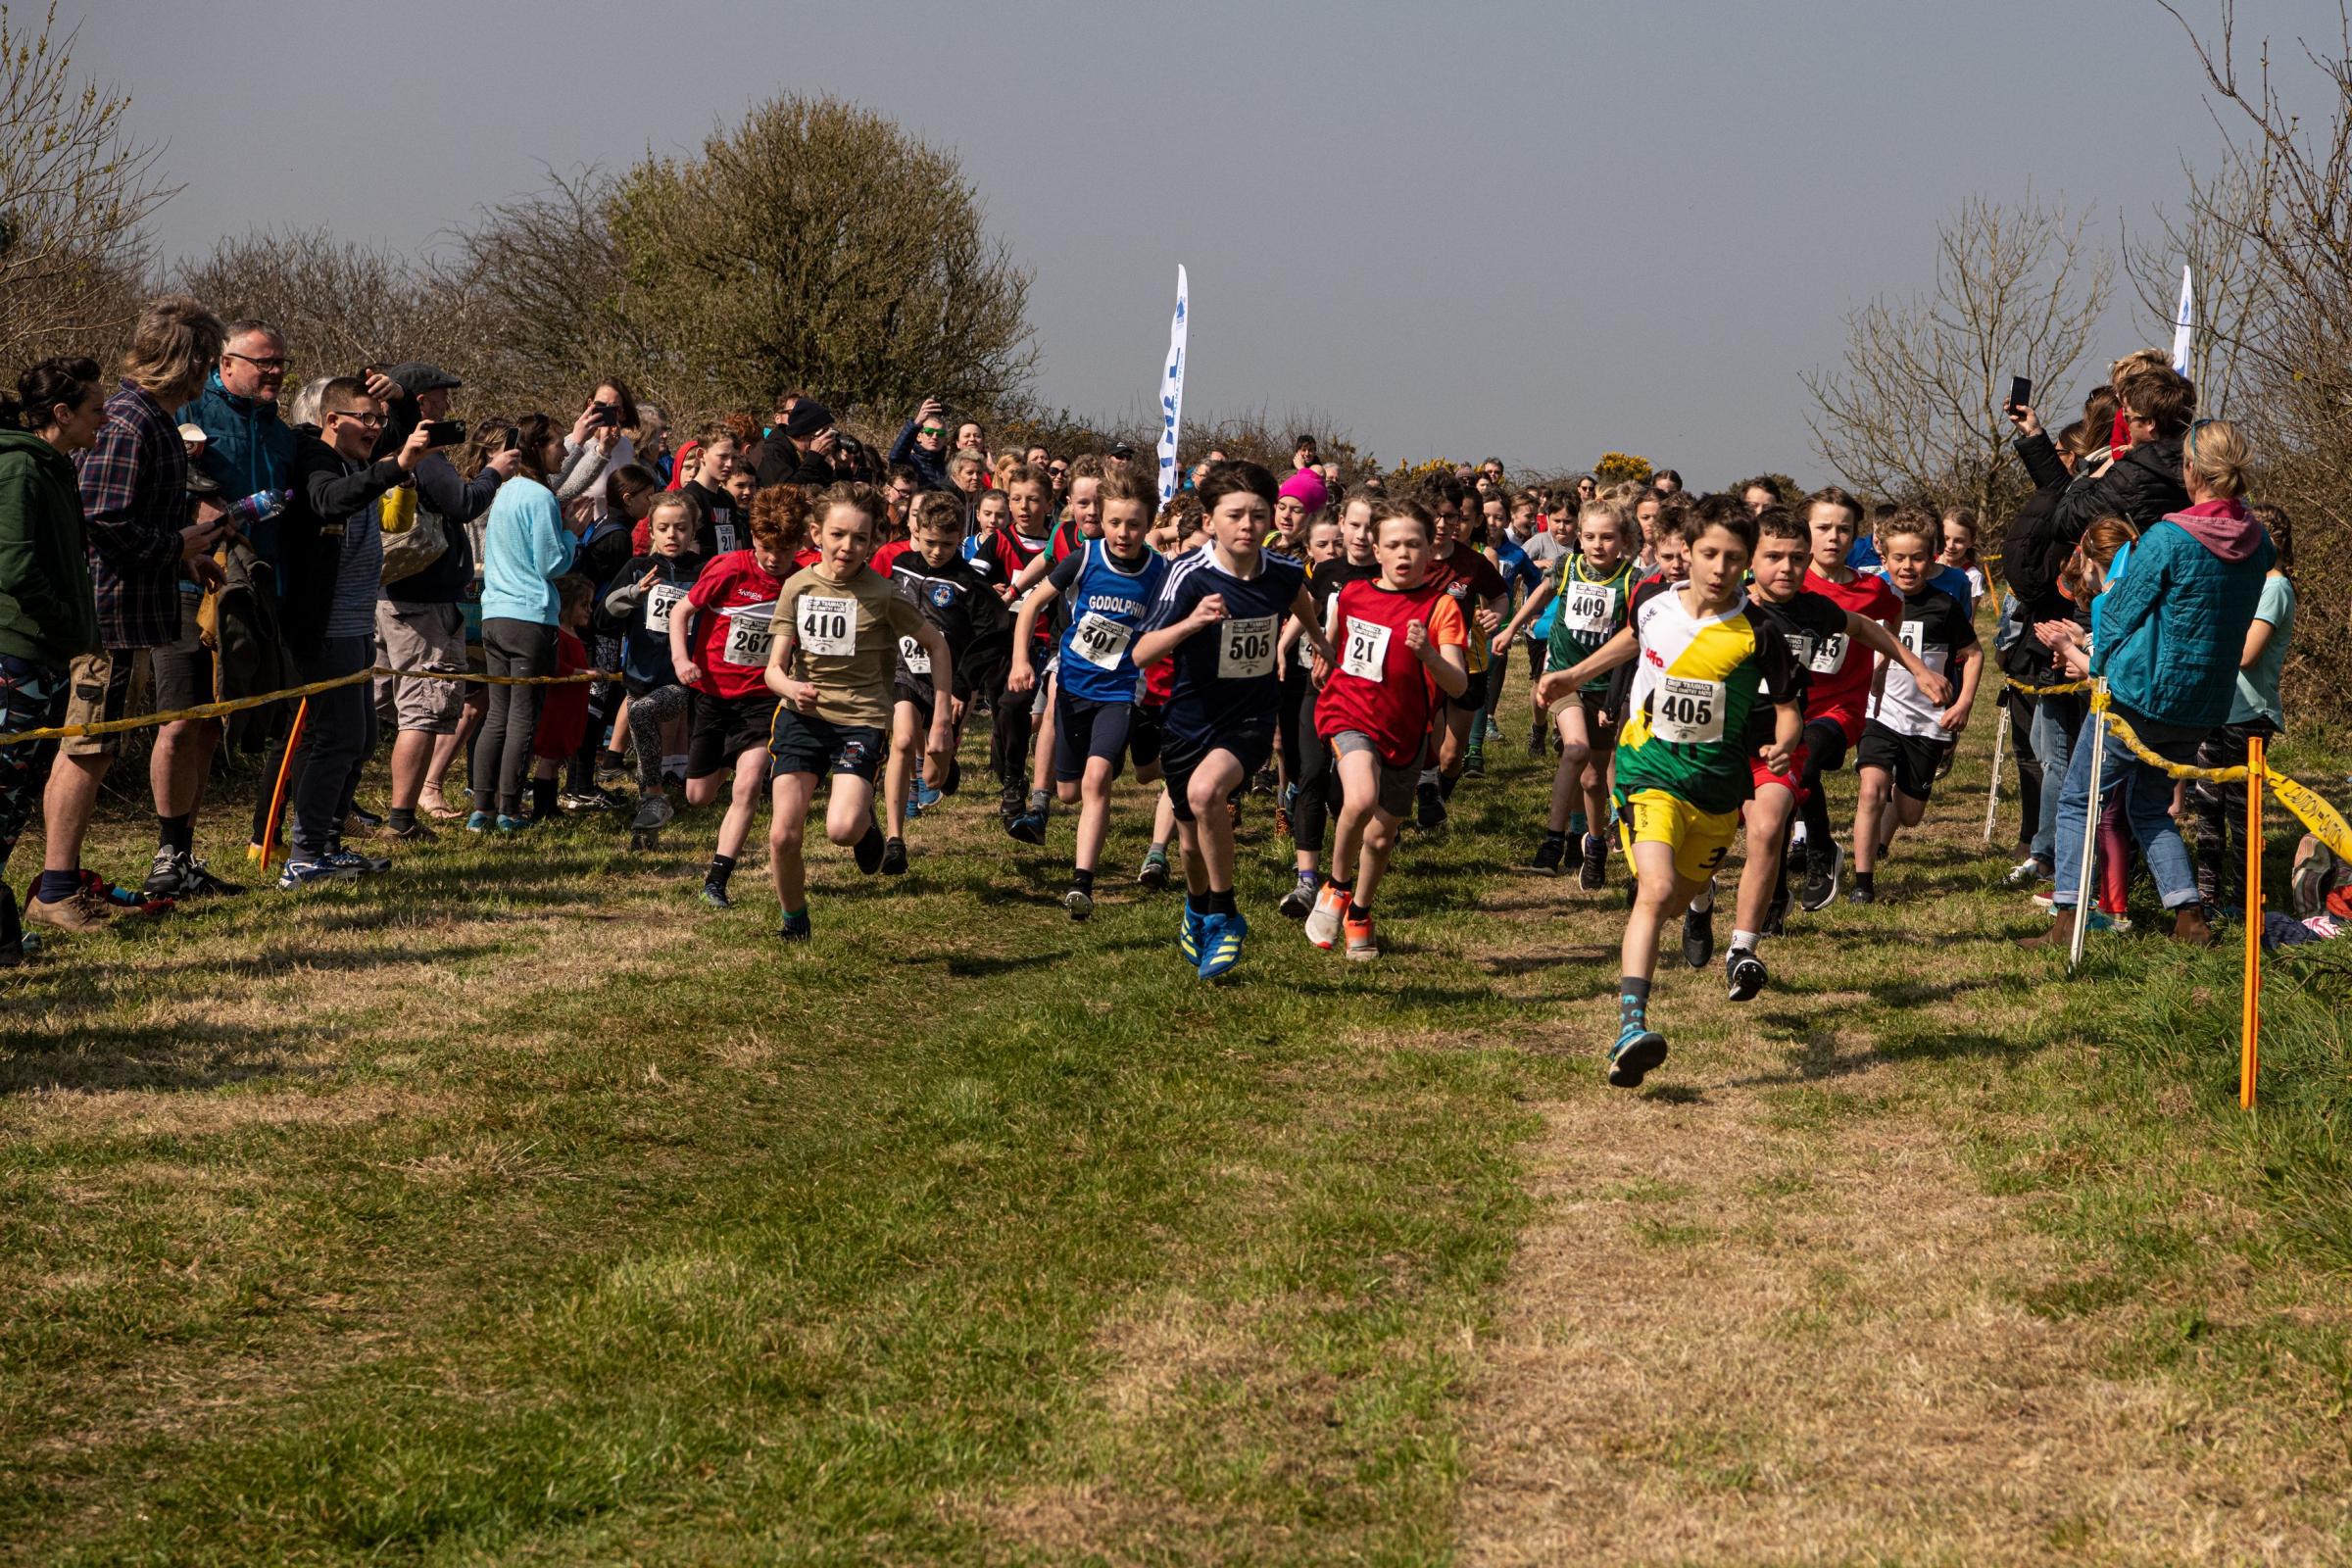 The start of the year five race